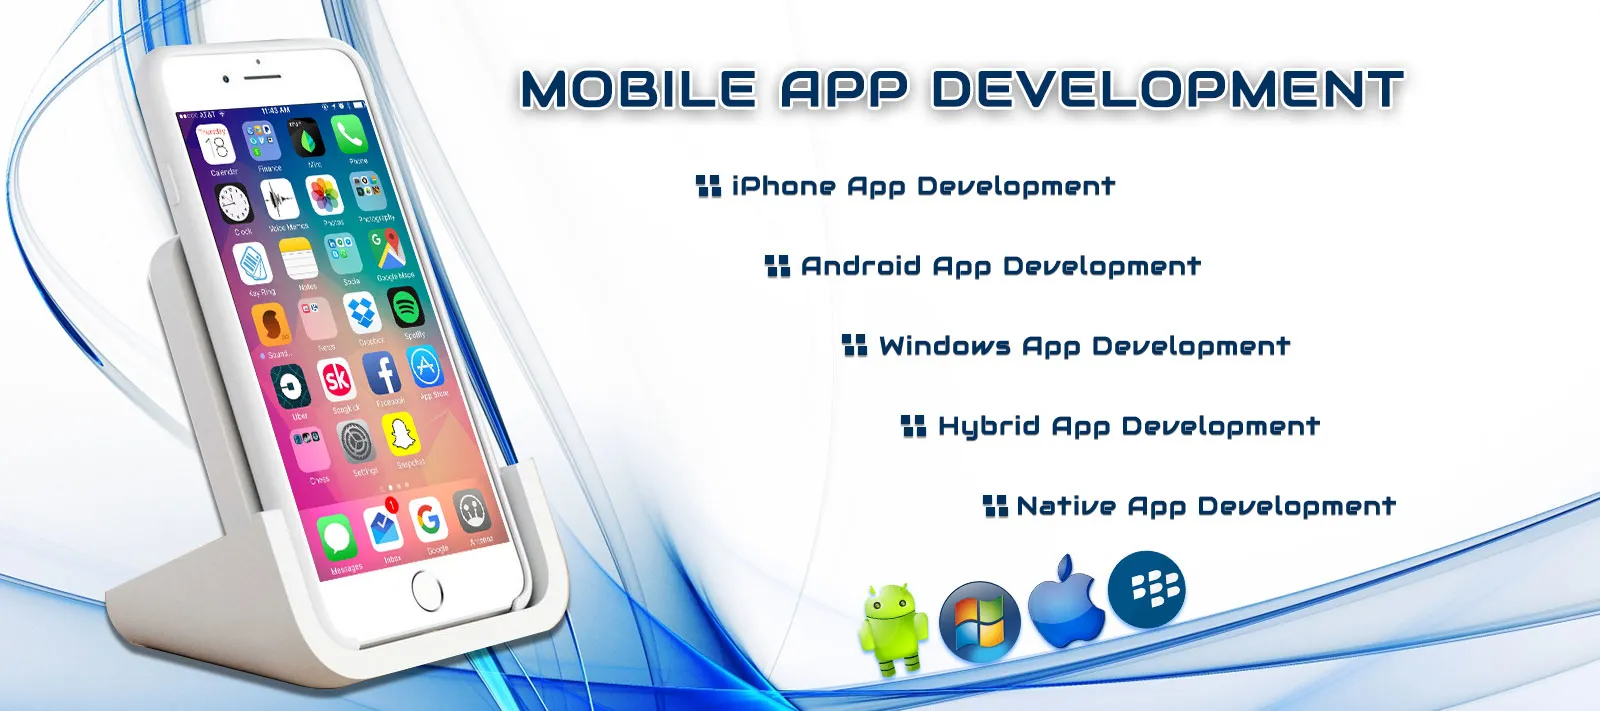 Top-Rated Mobile App Development Company in USA